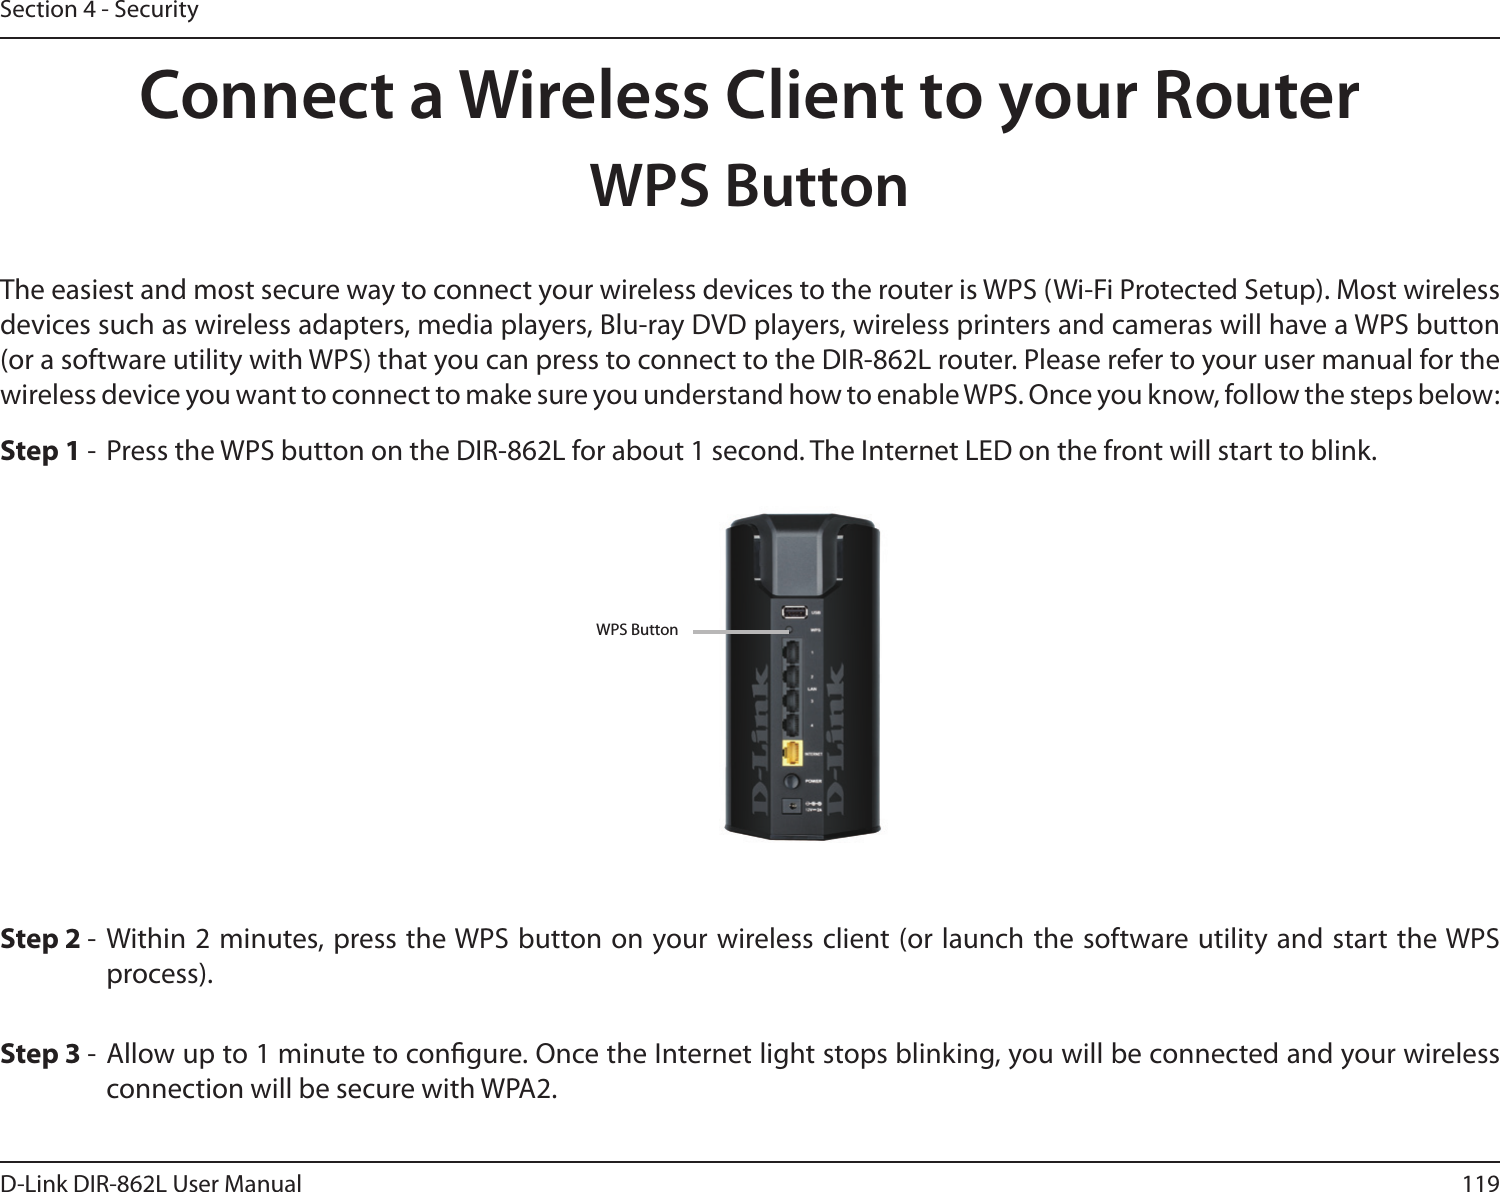 119D-Link DIR-862L User ManualSection 4 - SecurityConnect a Wireless Client to your RouterWPS ButtonStep 2 - Within 2 minutes, press the WPS button on your wireless client (or launch the software utility and start the WPS process).The easiest and most secure way to connect your wireless devices to the router is WPS (Wi-Fi Protected Setup). Most wireless devices such as wireless adapters, media players, Blu-ray DVD players, wireless printers and cameras will have a WPS button (or a software utility with WPS) that you can press to connect to the DIR-862L router. Please refer to your user manual for the wireless device you want to connect to make sure you understand how to enable WPS. Once you know, follow the steps below:Step 1 -  Press the WPS button on the DIR-862L for about 1 second. The Internet LED on the front will start to blink.Step 3 - Allow up to 1 minute to congure. Once the Internet light stops blinking, you will be connected and your wireless connection will be secure with WPA2.WPS Button